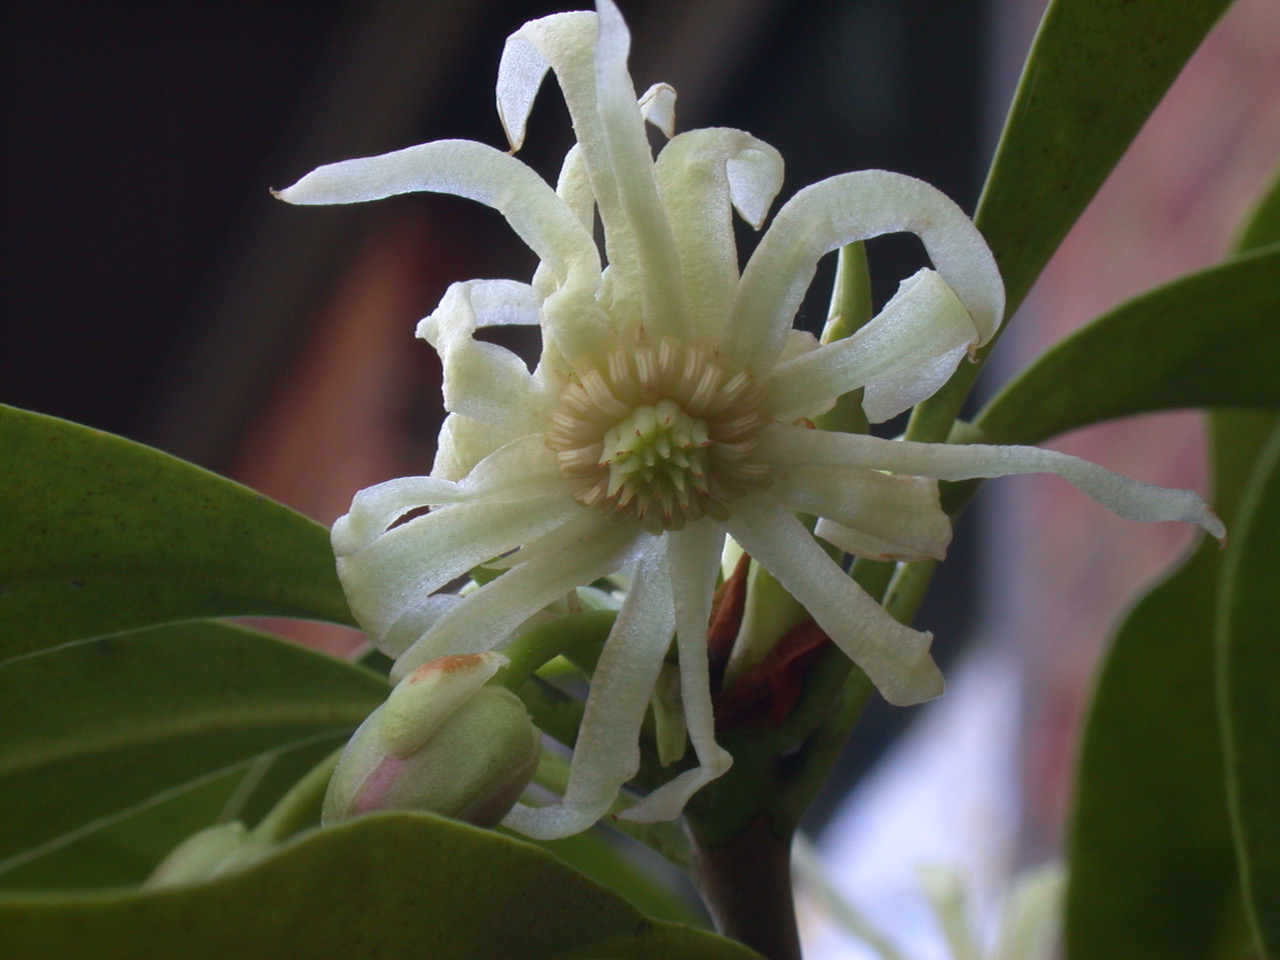 The Scientific Name is Illicium parviflorum. You will likely hear them called Swamp Star-anise, Yellow Anise-tree, Ocala Anise-tree. This picture shows the Flower of Illicium parviflorum